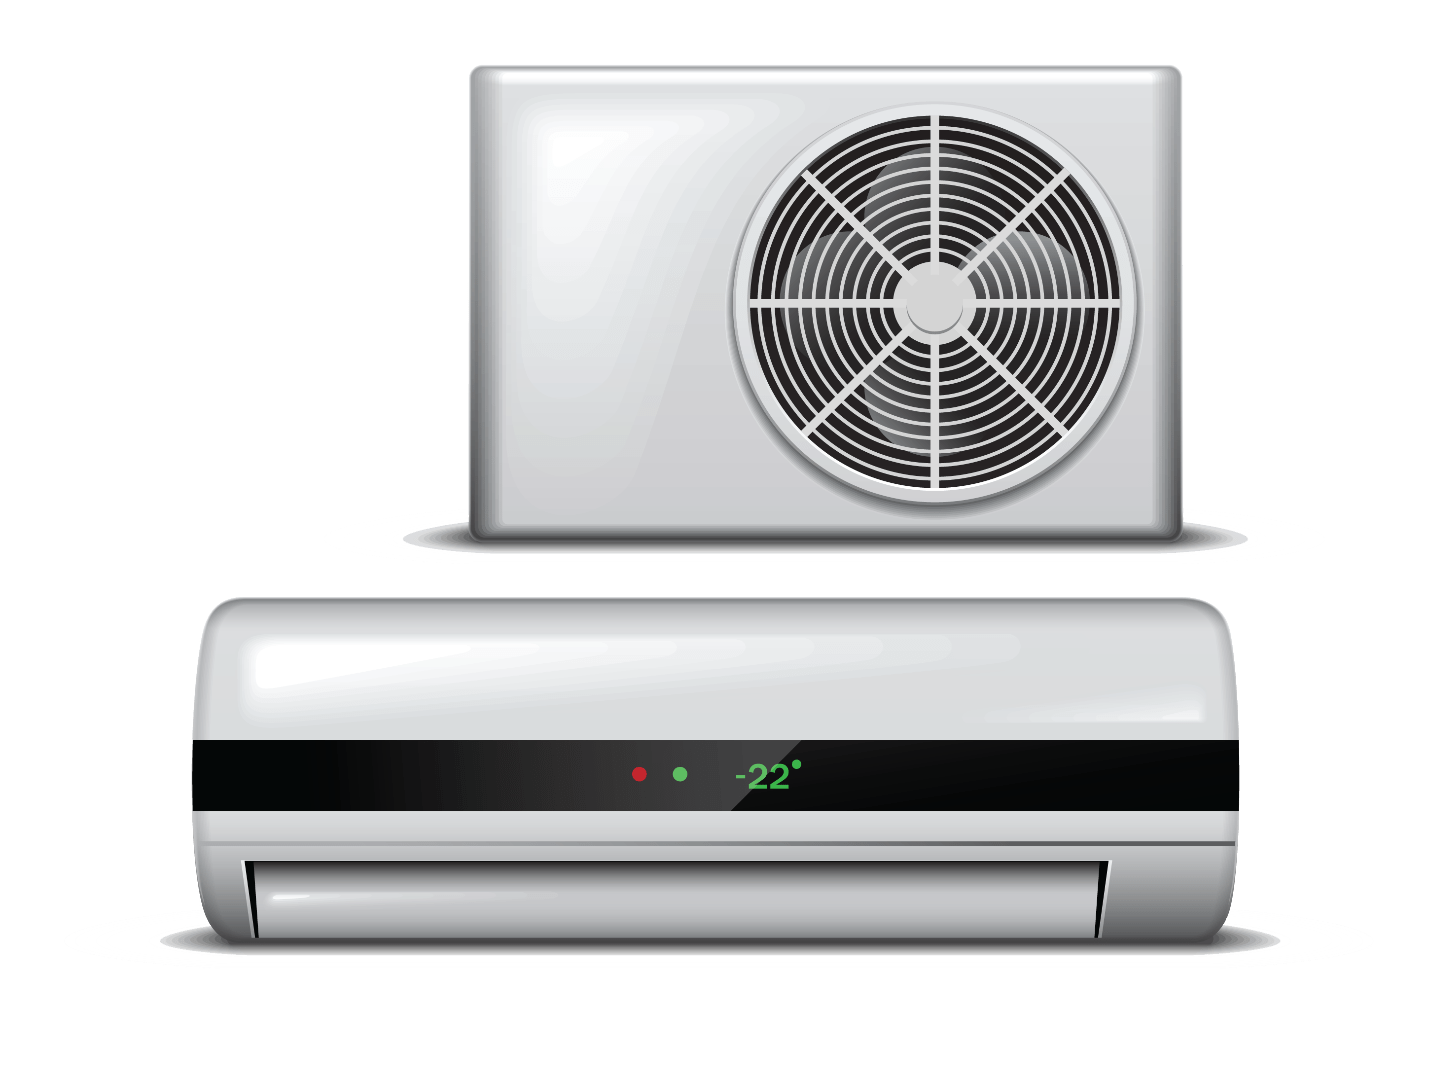 Why is a licensed contractor required to install an HVAC system?